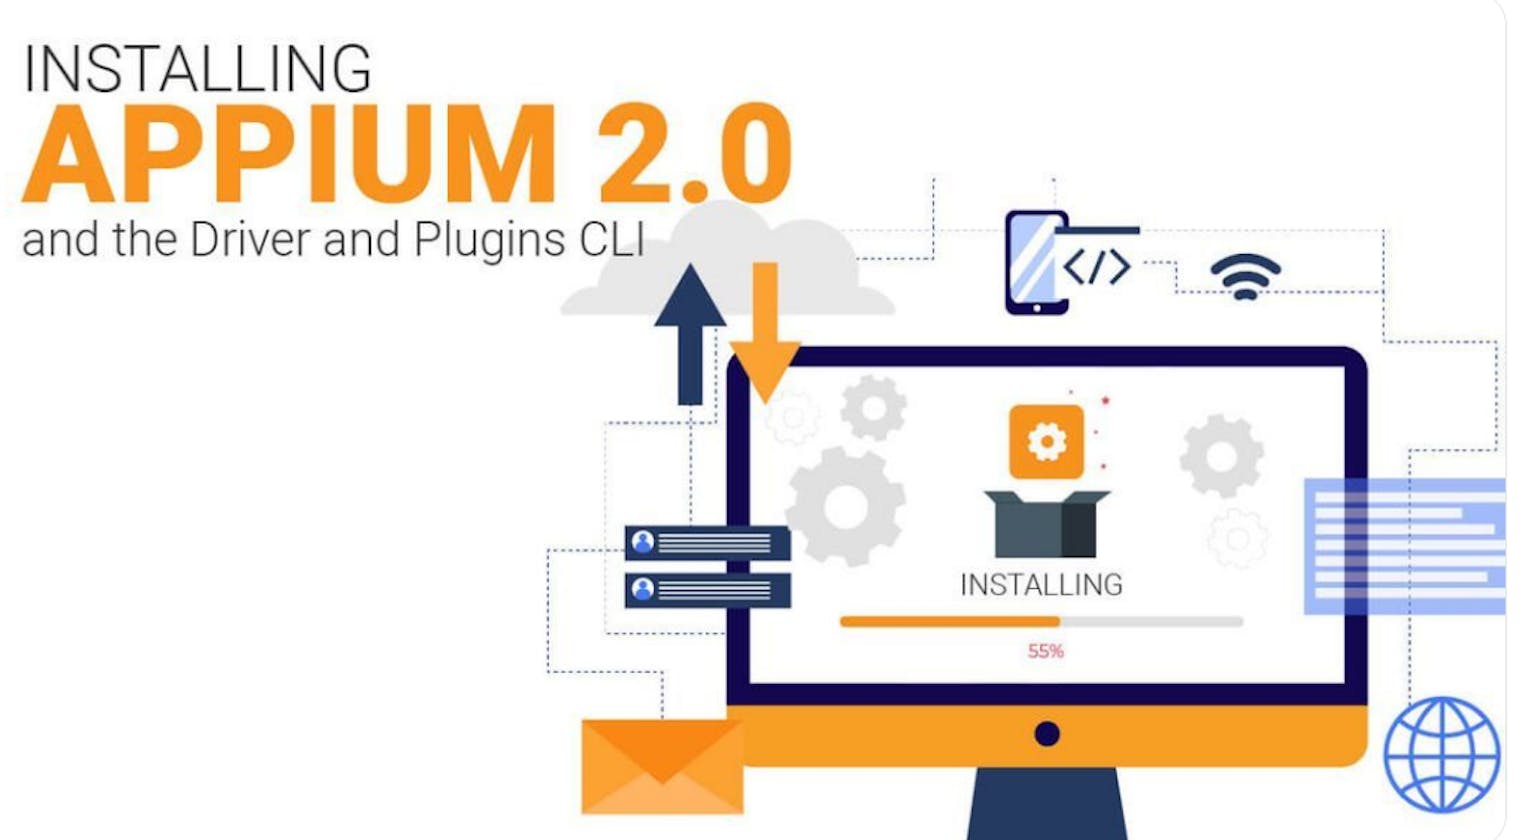 Installing Appium 2.0 and the Driver and Plugins CLI